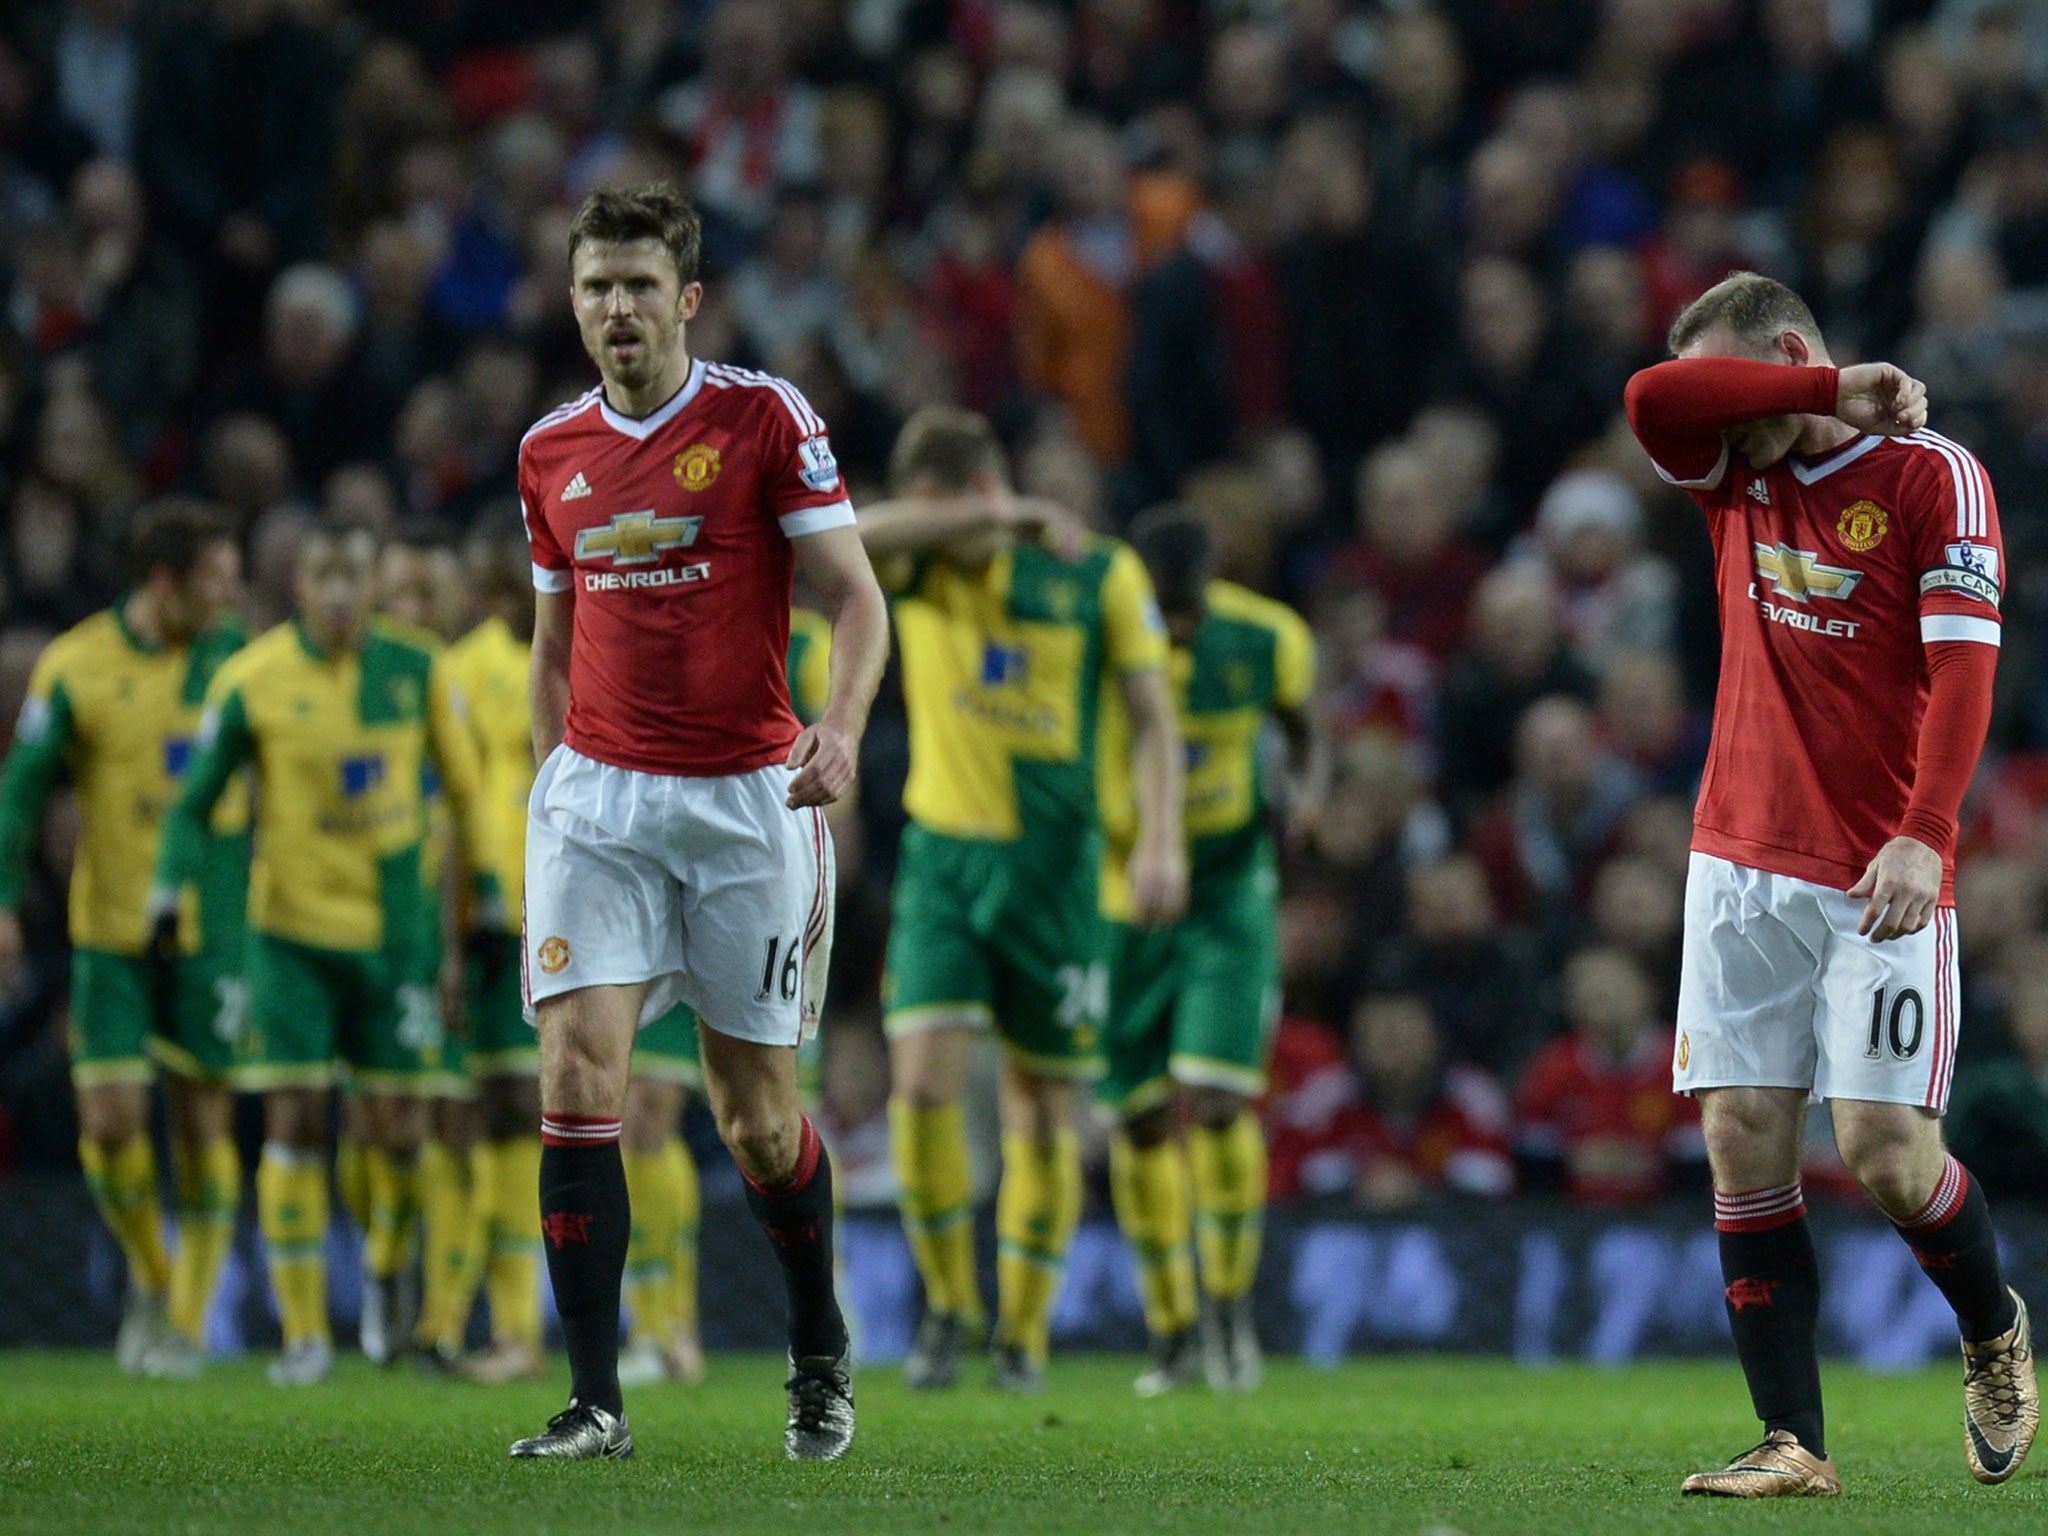 Wayne Rooney and Michael Carrick appear dejected after conceding a goal to Norwich